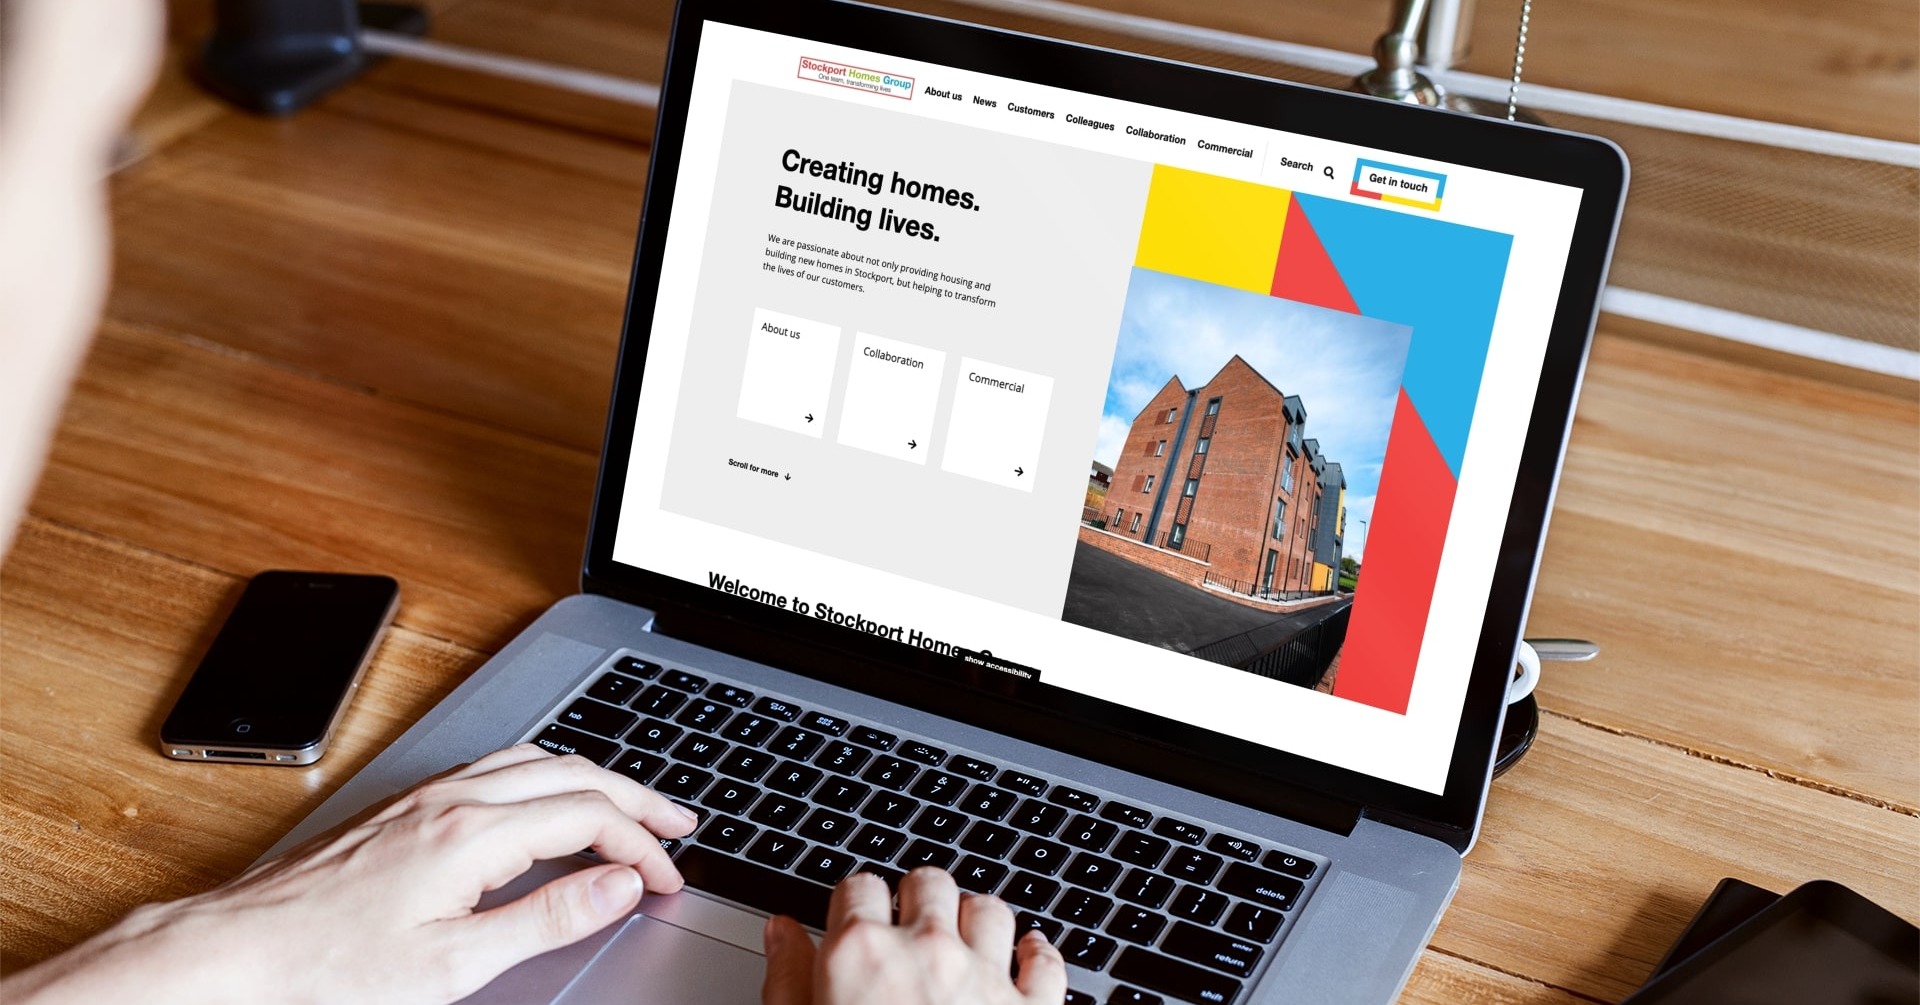 Stockport Homes Group brand new website goes live